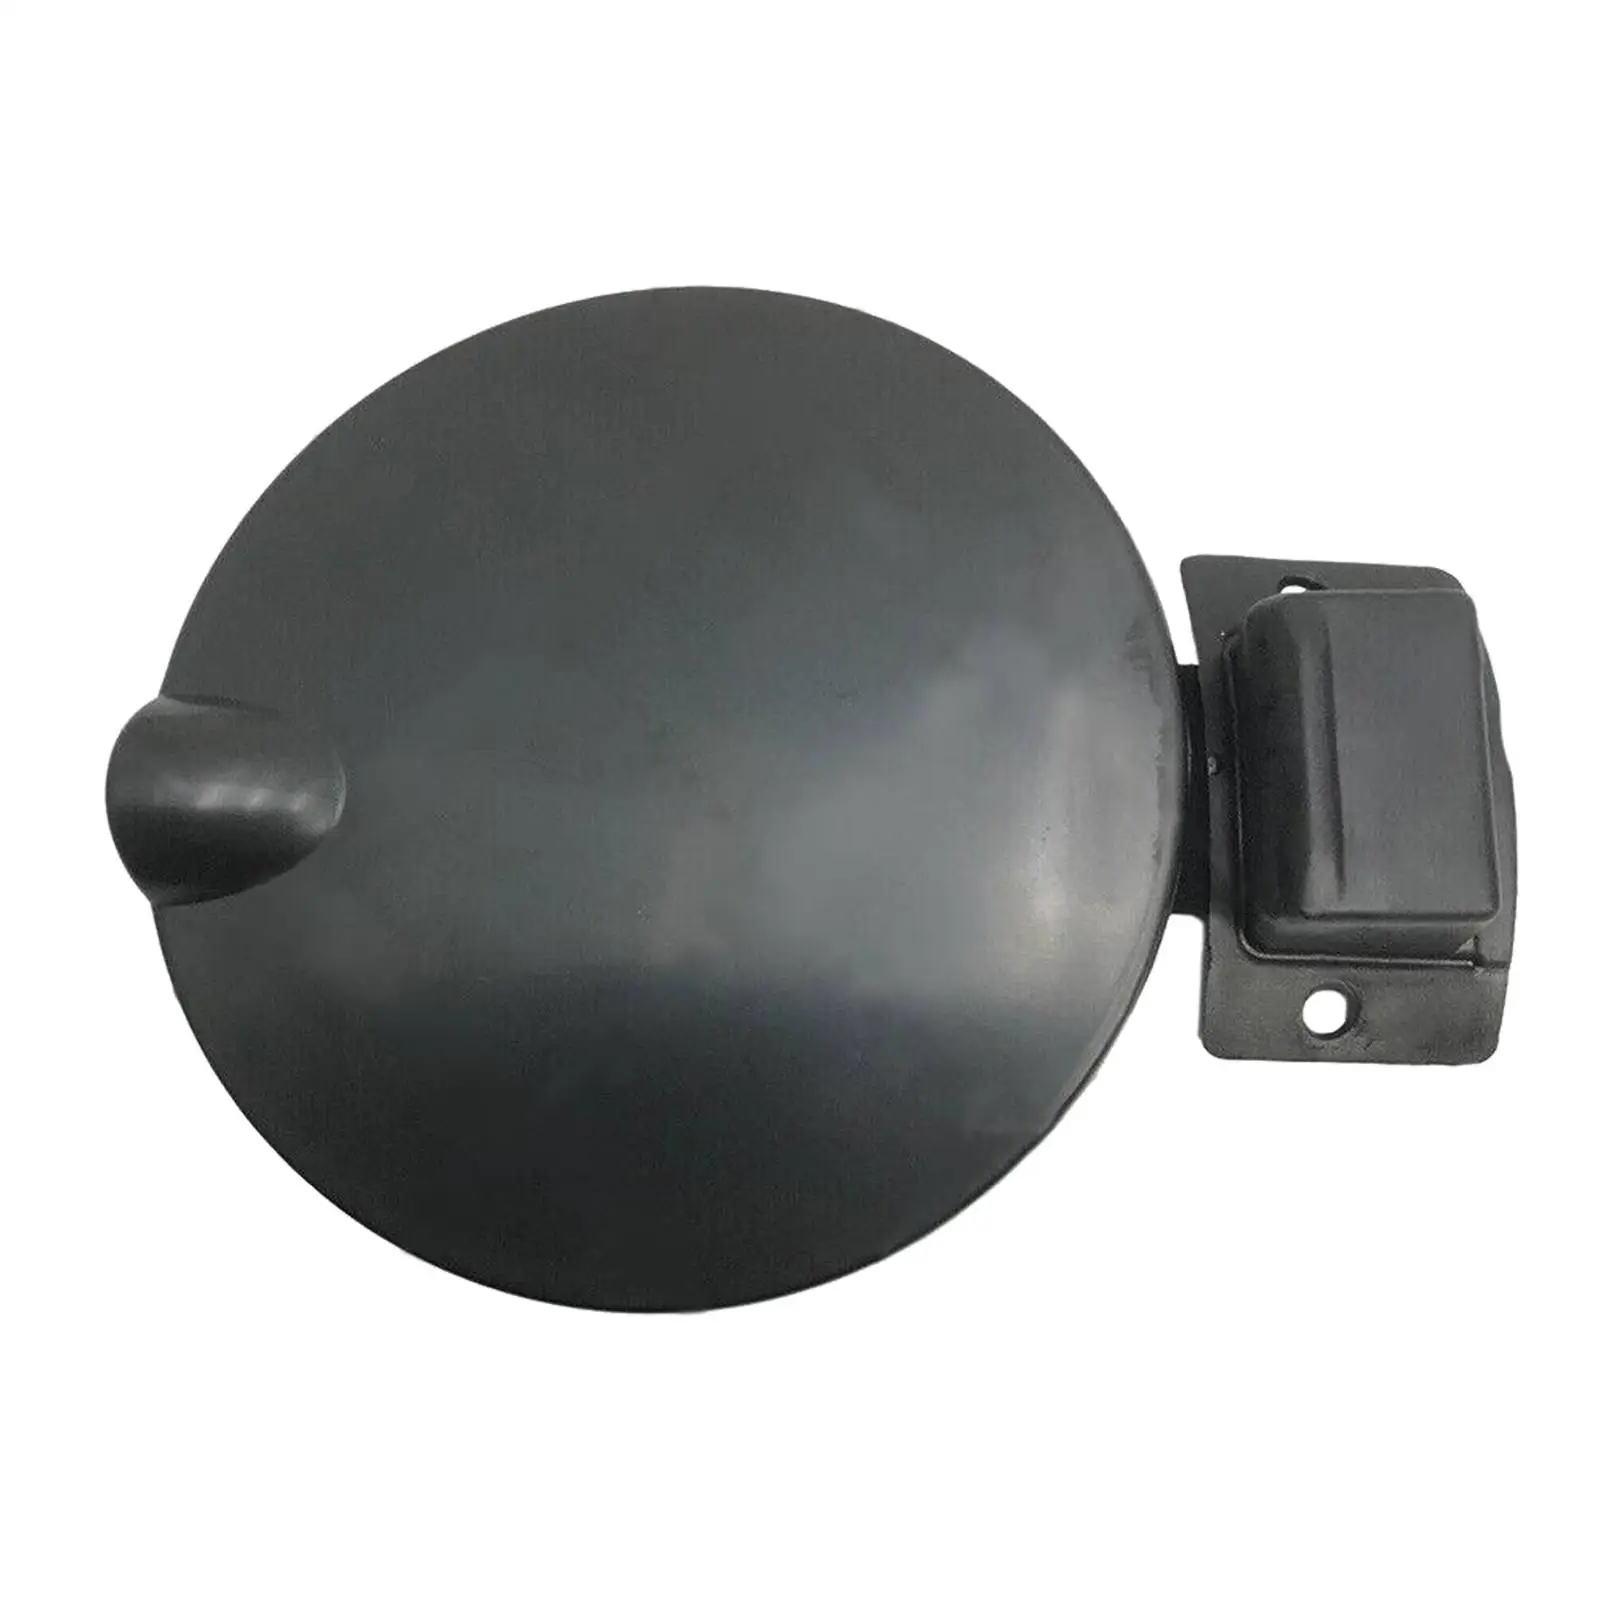 Fuel Filler Flap Fuel Tank Cap Accessories Modification for Holden VU Vy Vz Ute 2000 to 2007 Professional